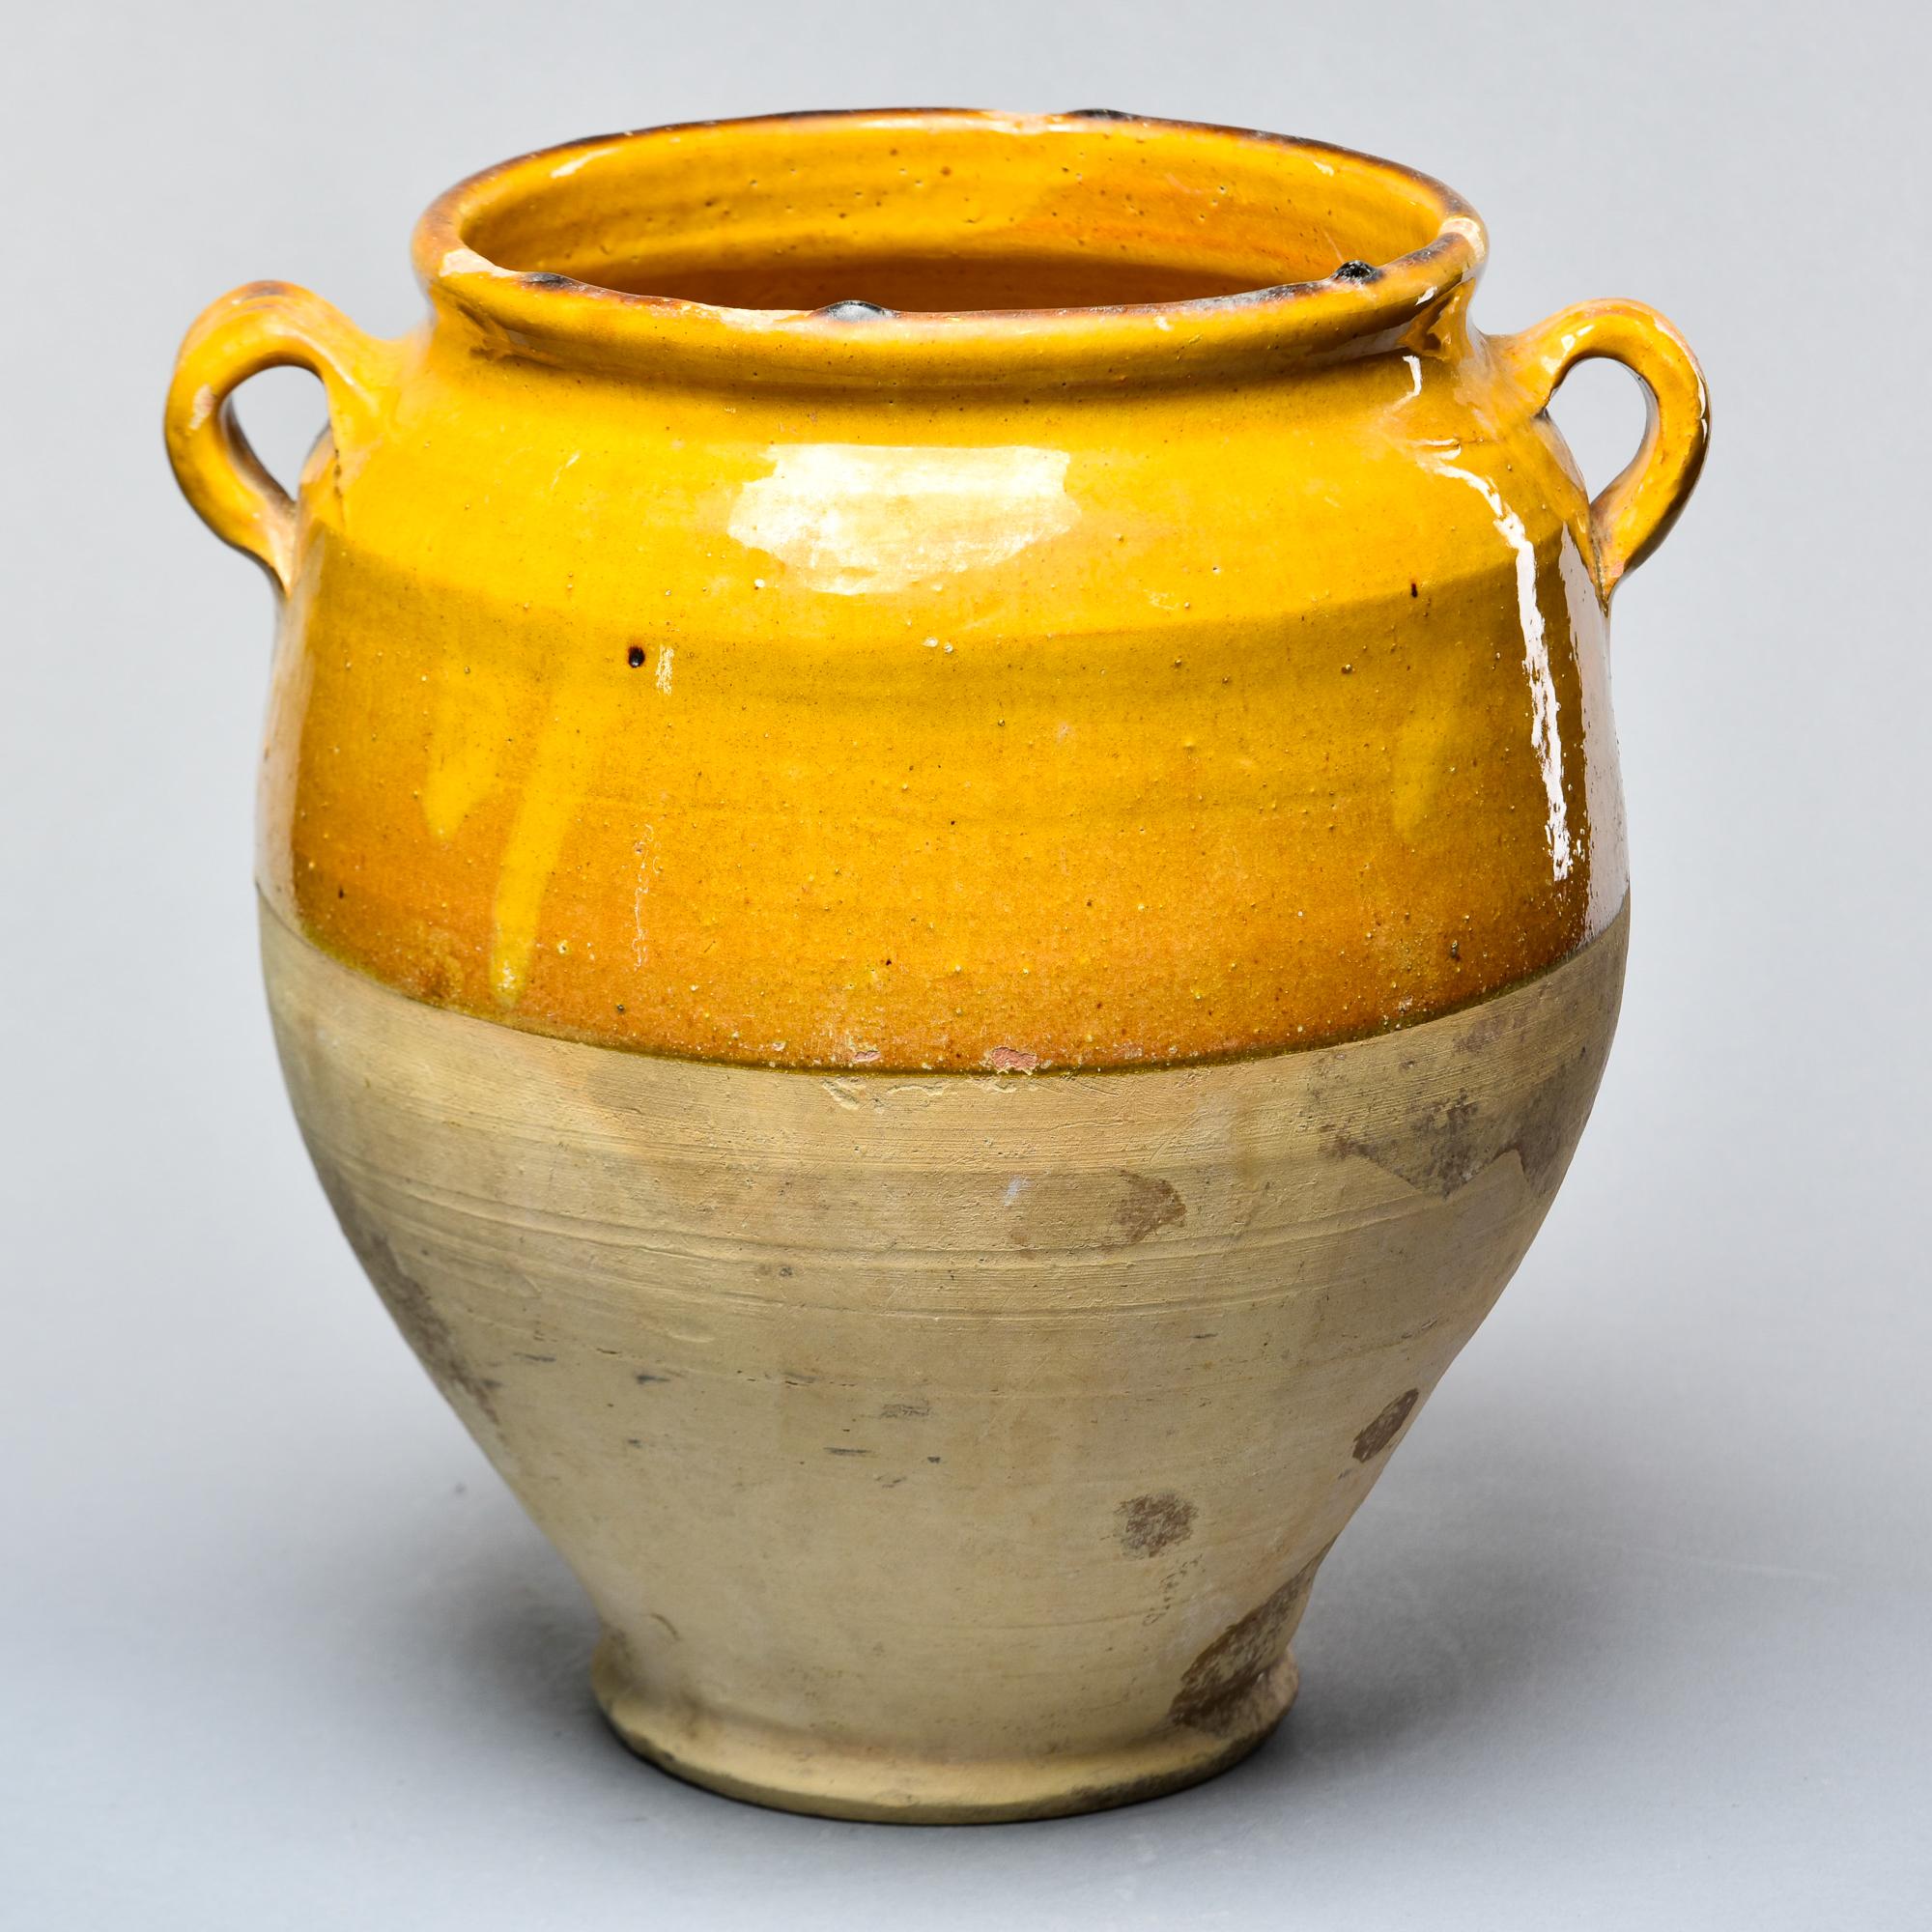 Found in France, this French confit jar dates from approximately 1915. This piece stands 12.25” high and has the traditional form with a wide vessel body and two handles on the sides with a mustard-colored glaze on the outside top half and fully